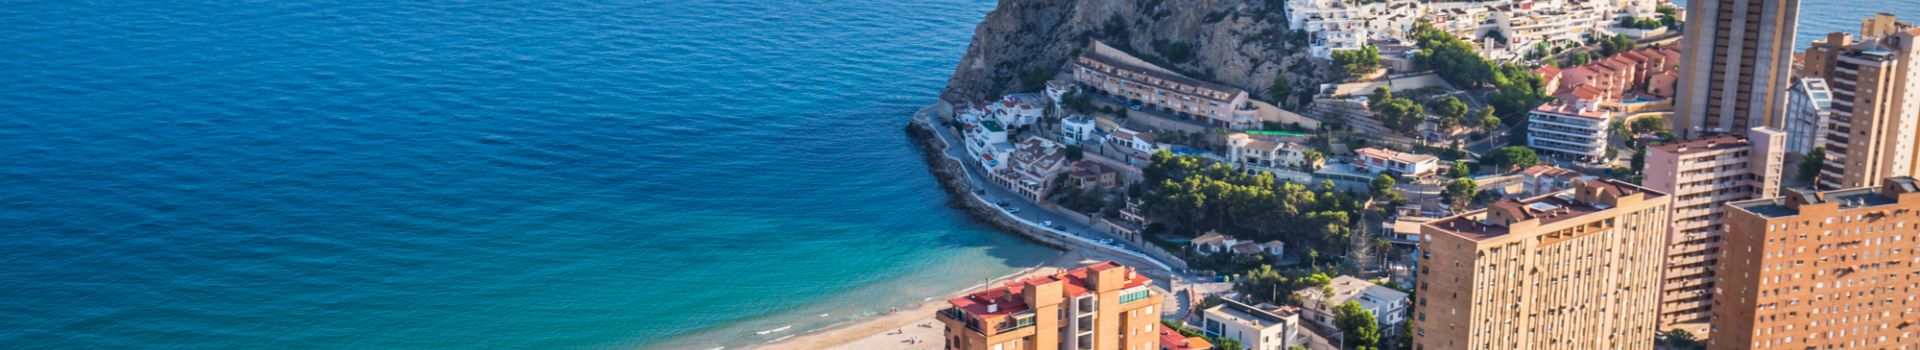 Cheap holidays to Benidorm with Cassidy Travel